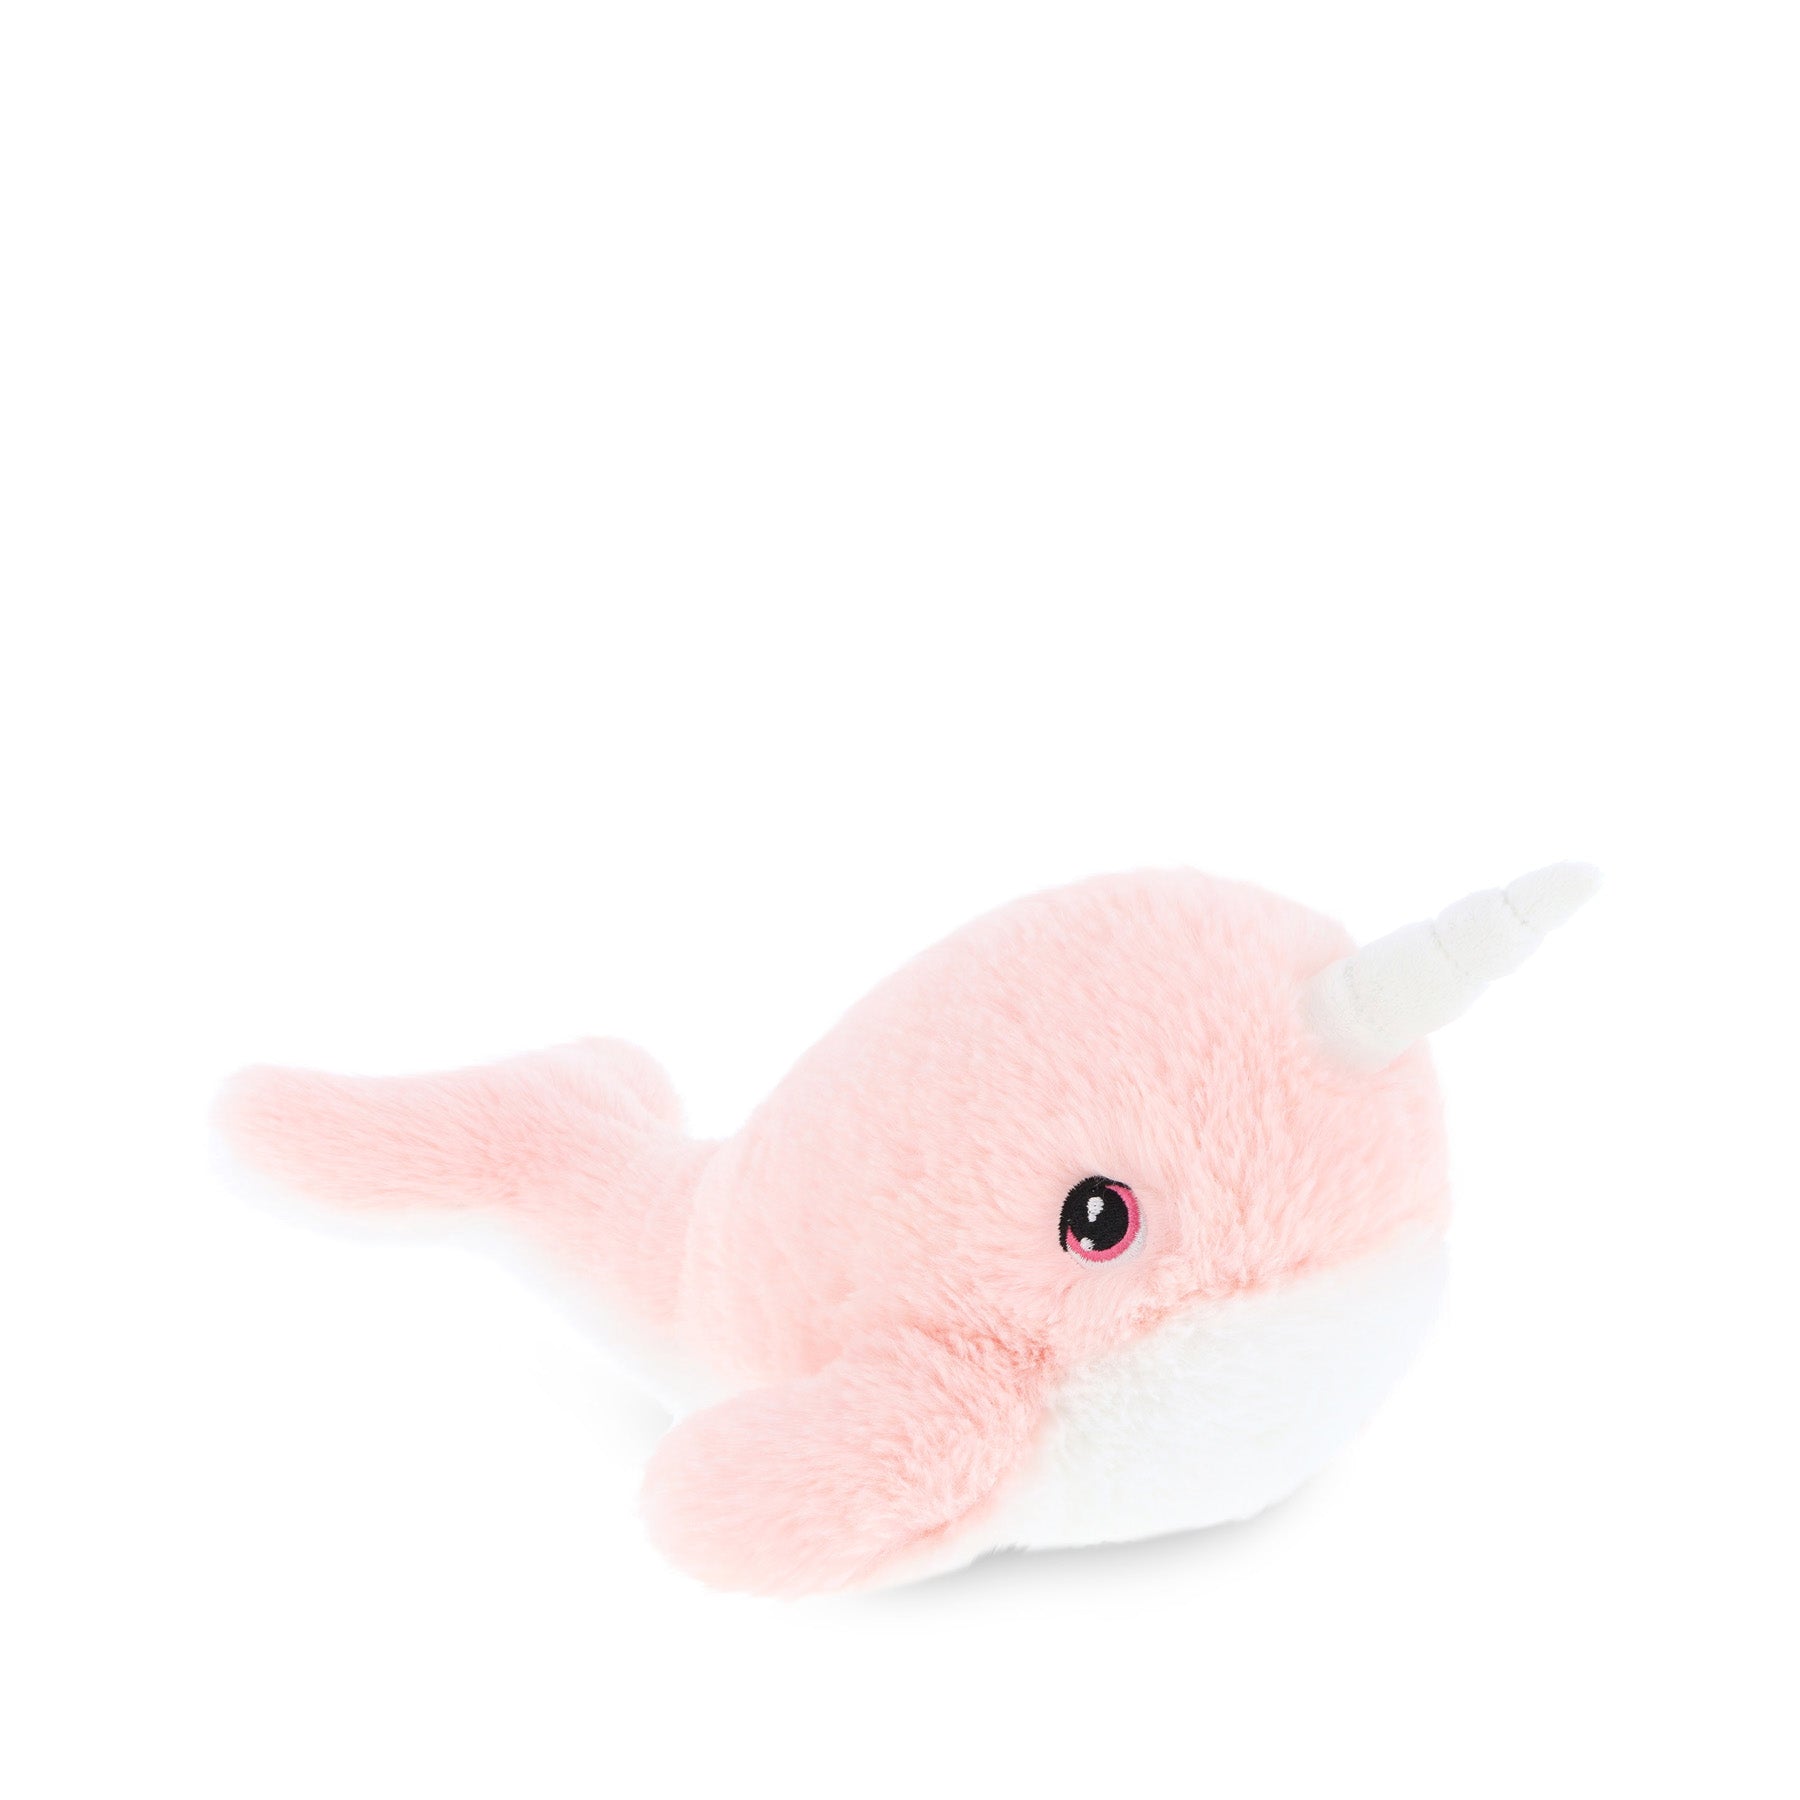 Pink narwhal plush toy with white tusk on a white background.